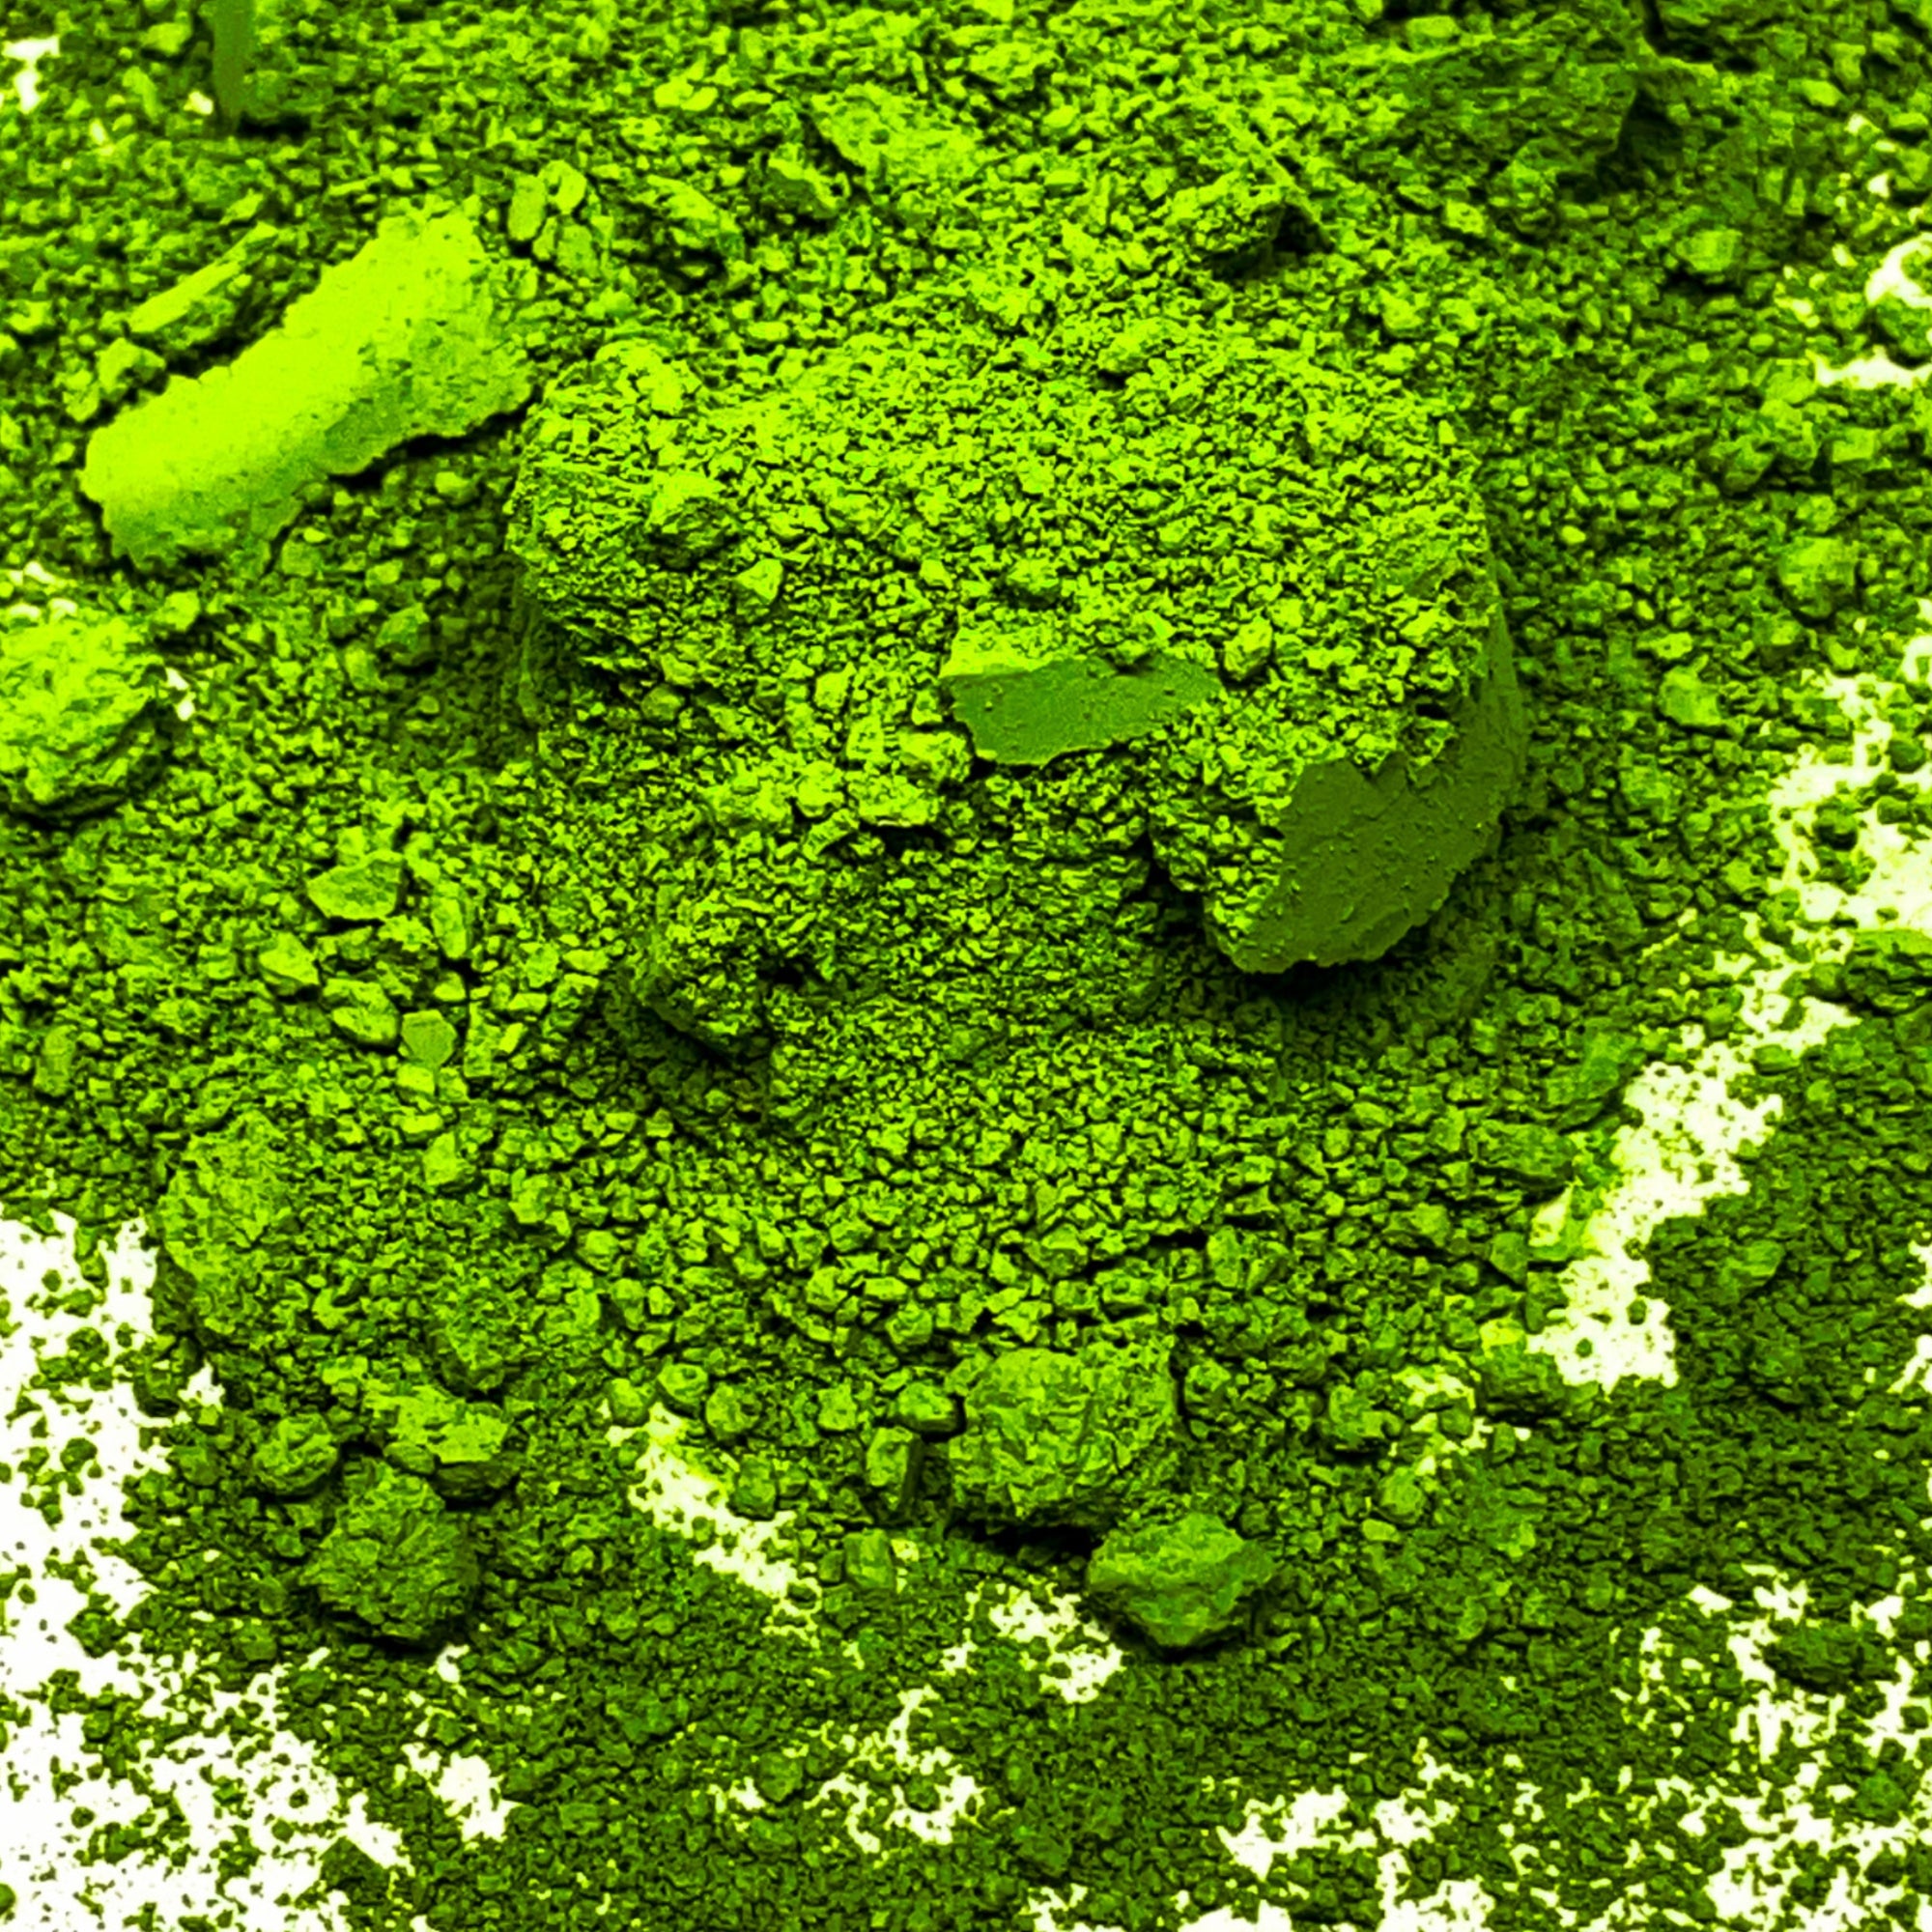 Why is Matcha Better than Coffee?